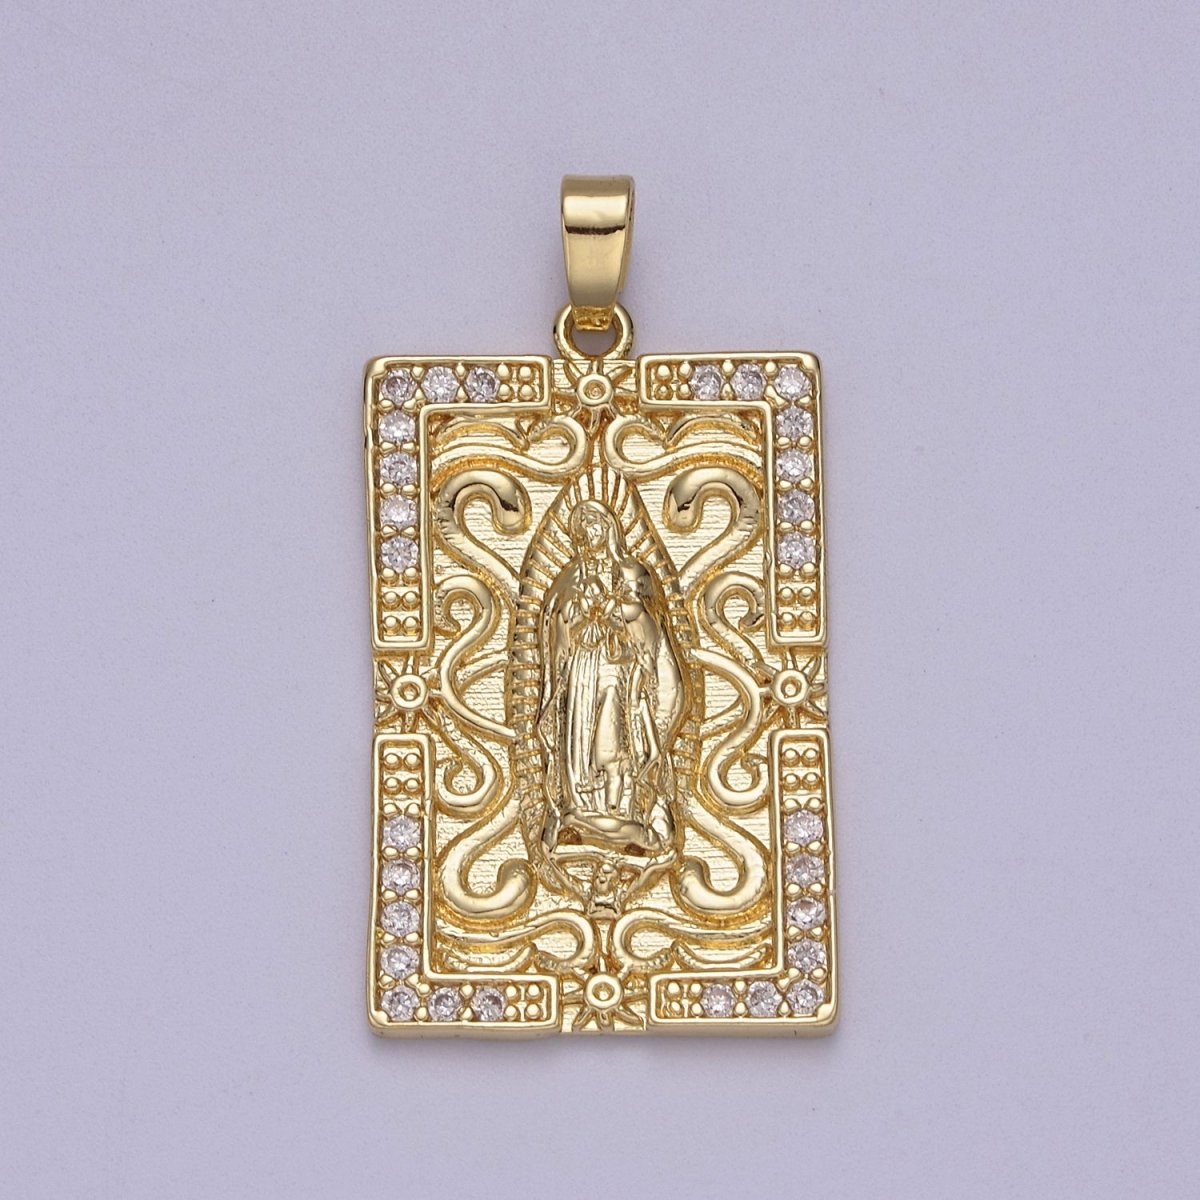 Gold Tag Lady Guadalupe Virgin Mary Pendant for Catholic Religious Jewelry Making N-603 - DLUXCA